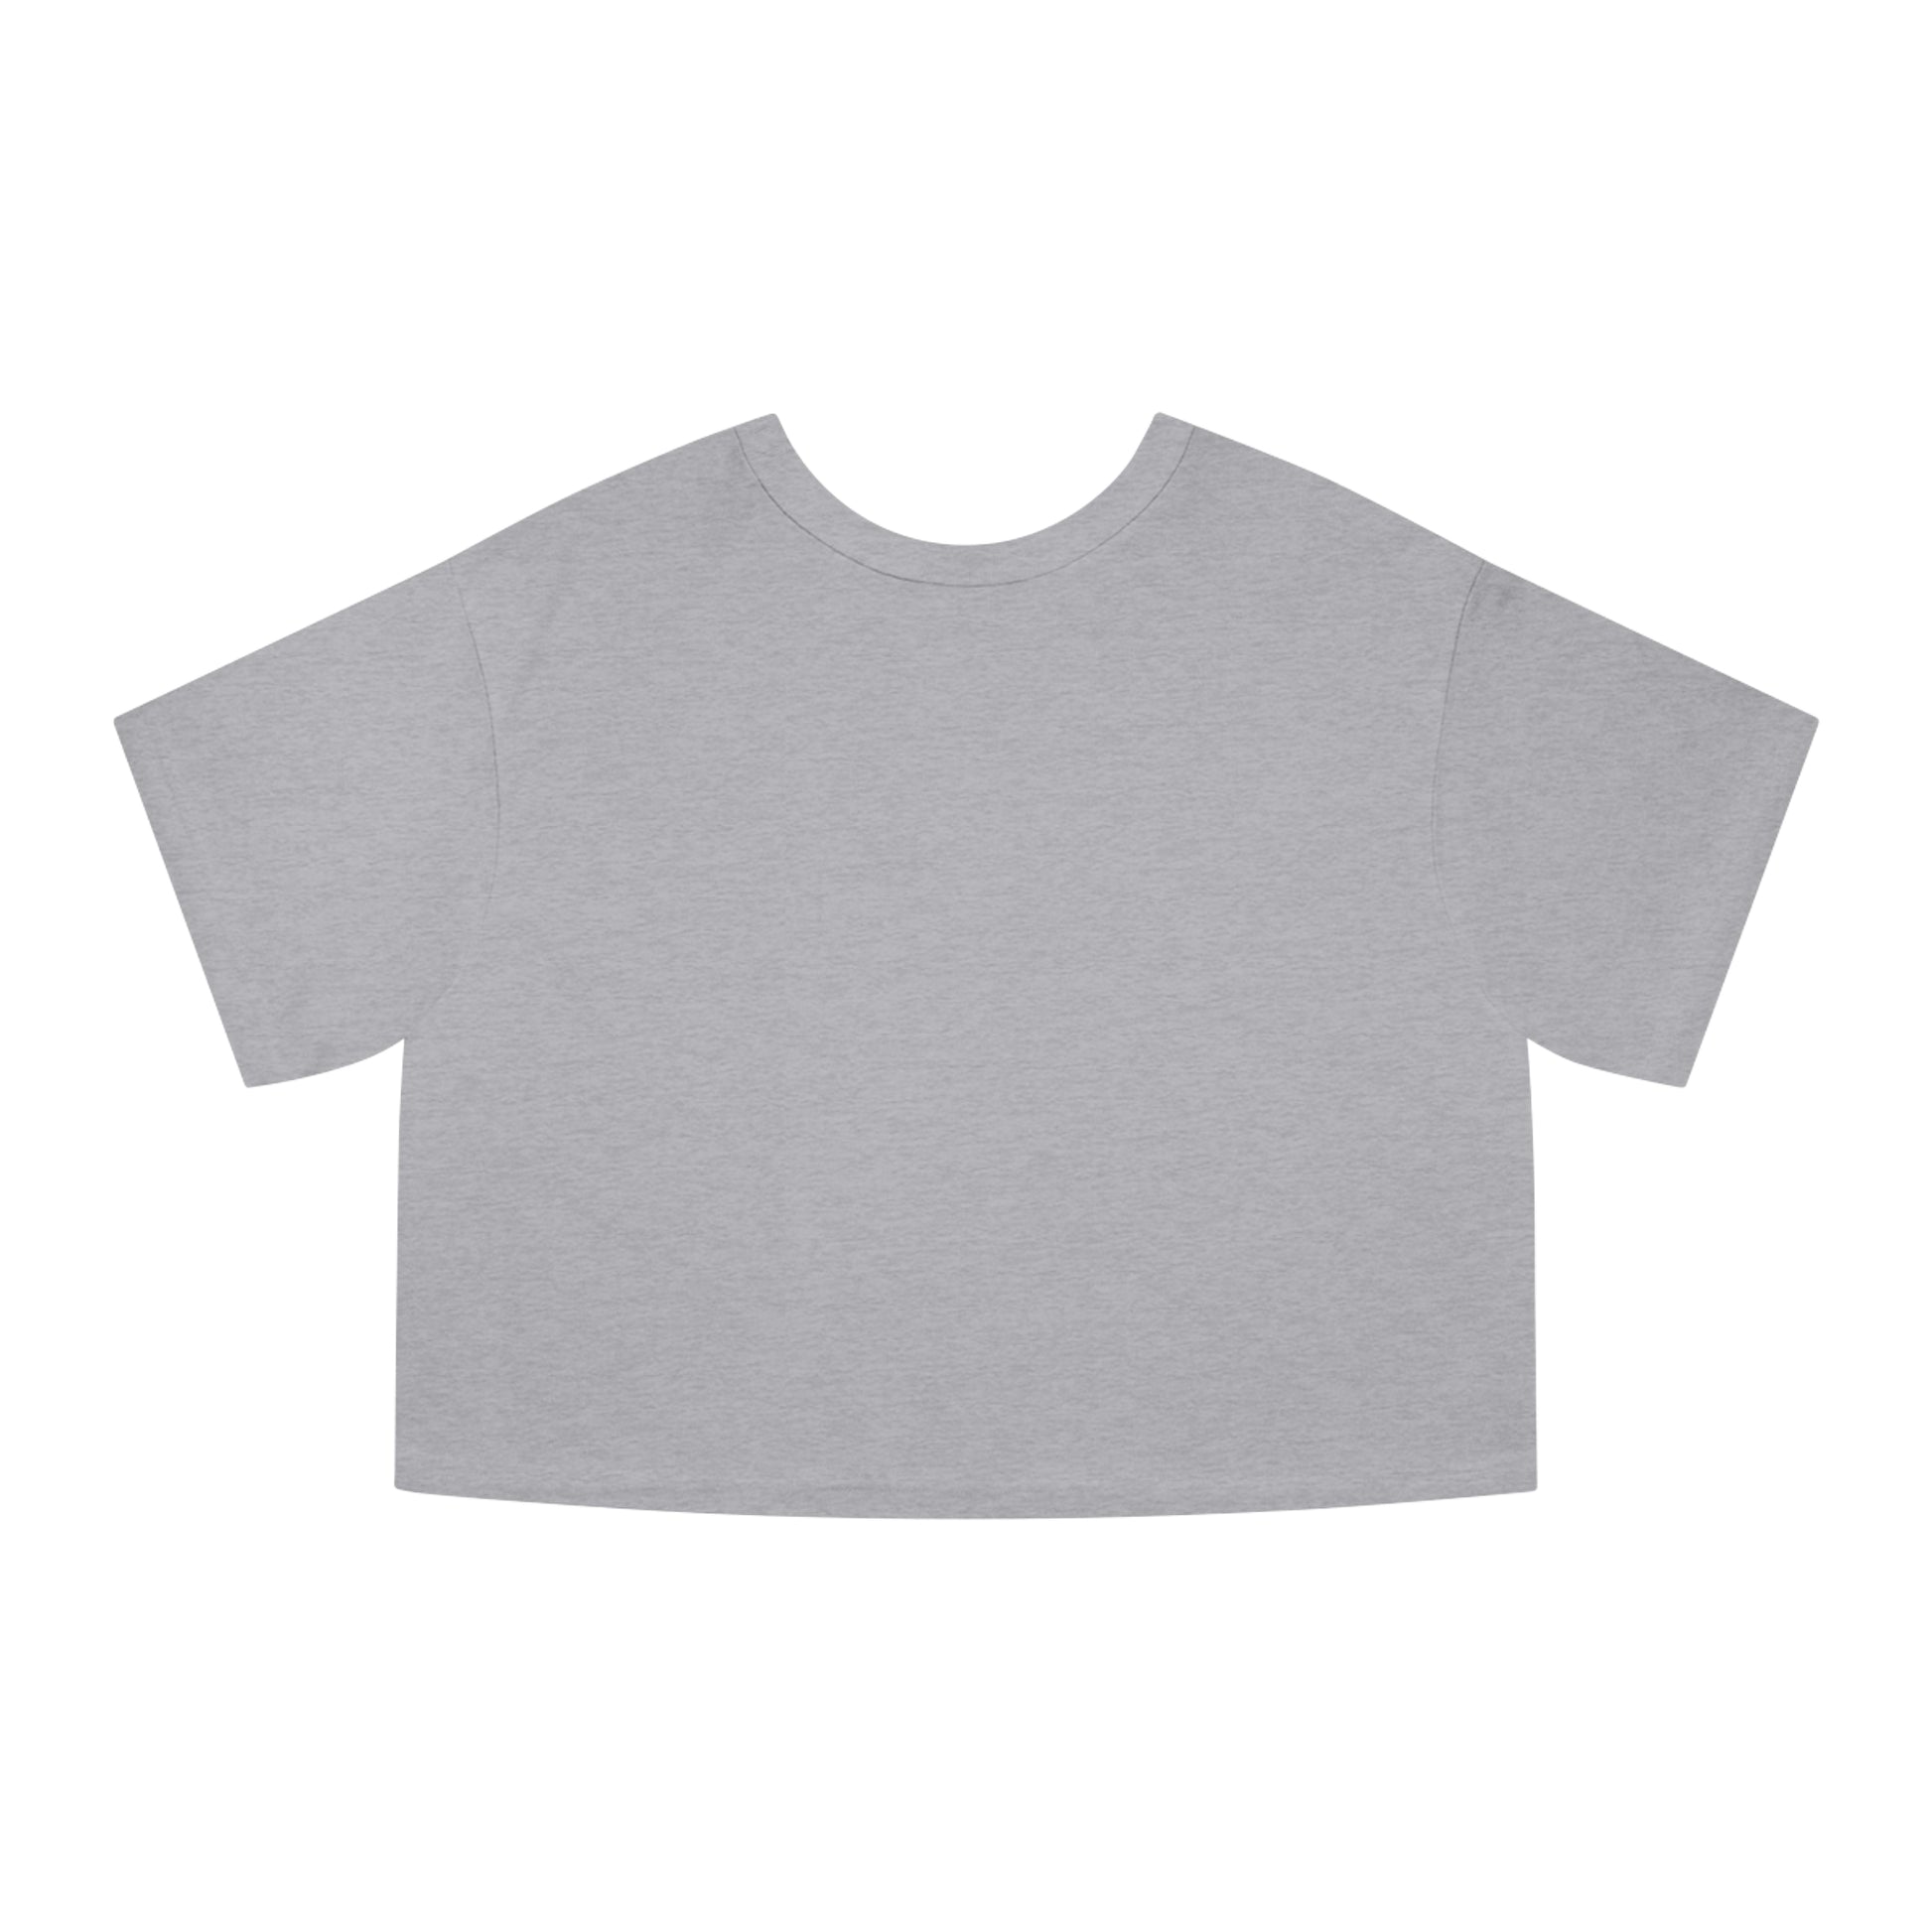 Flat back view of the Oxford grey shirt